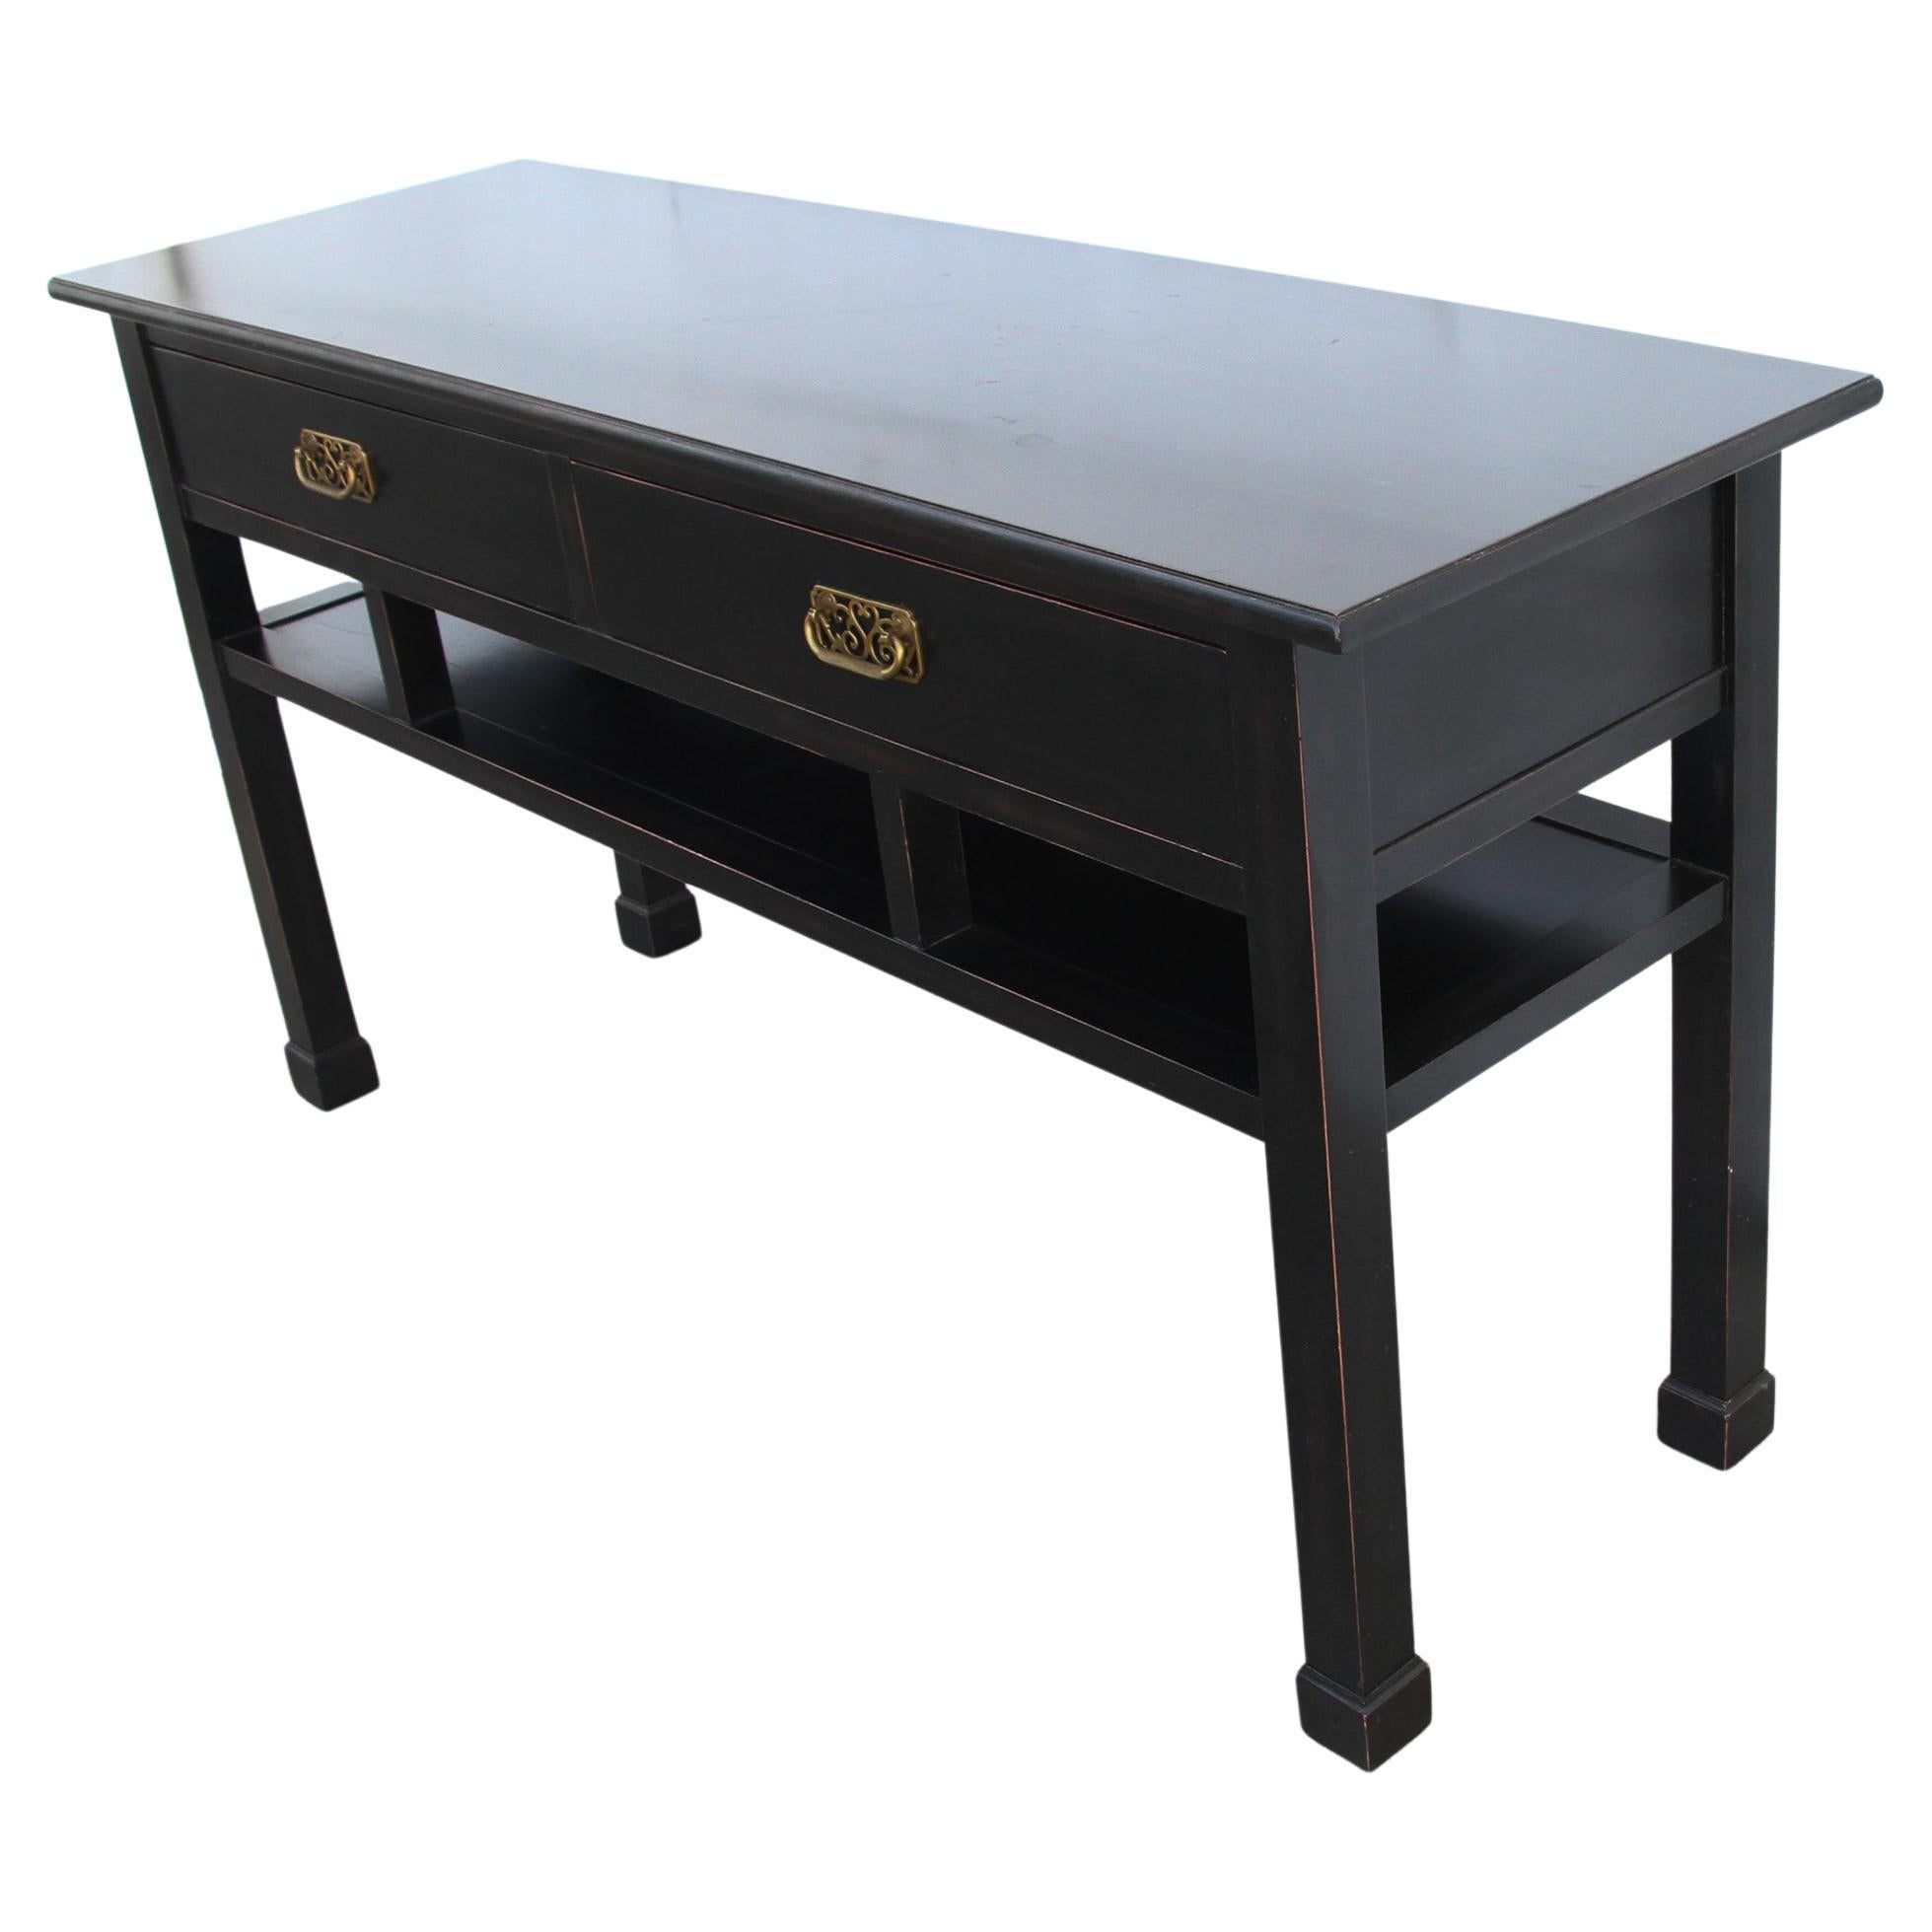 Chin Hua Baker style Ebonized console table

Ebonized chinoiserie console or sofa table in the style of Baker furniture. Featuring Ming style feet and two drawers with thin red reveals and beautiful brass pulls.
  